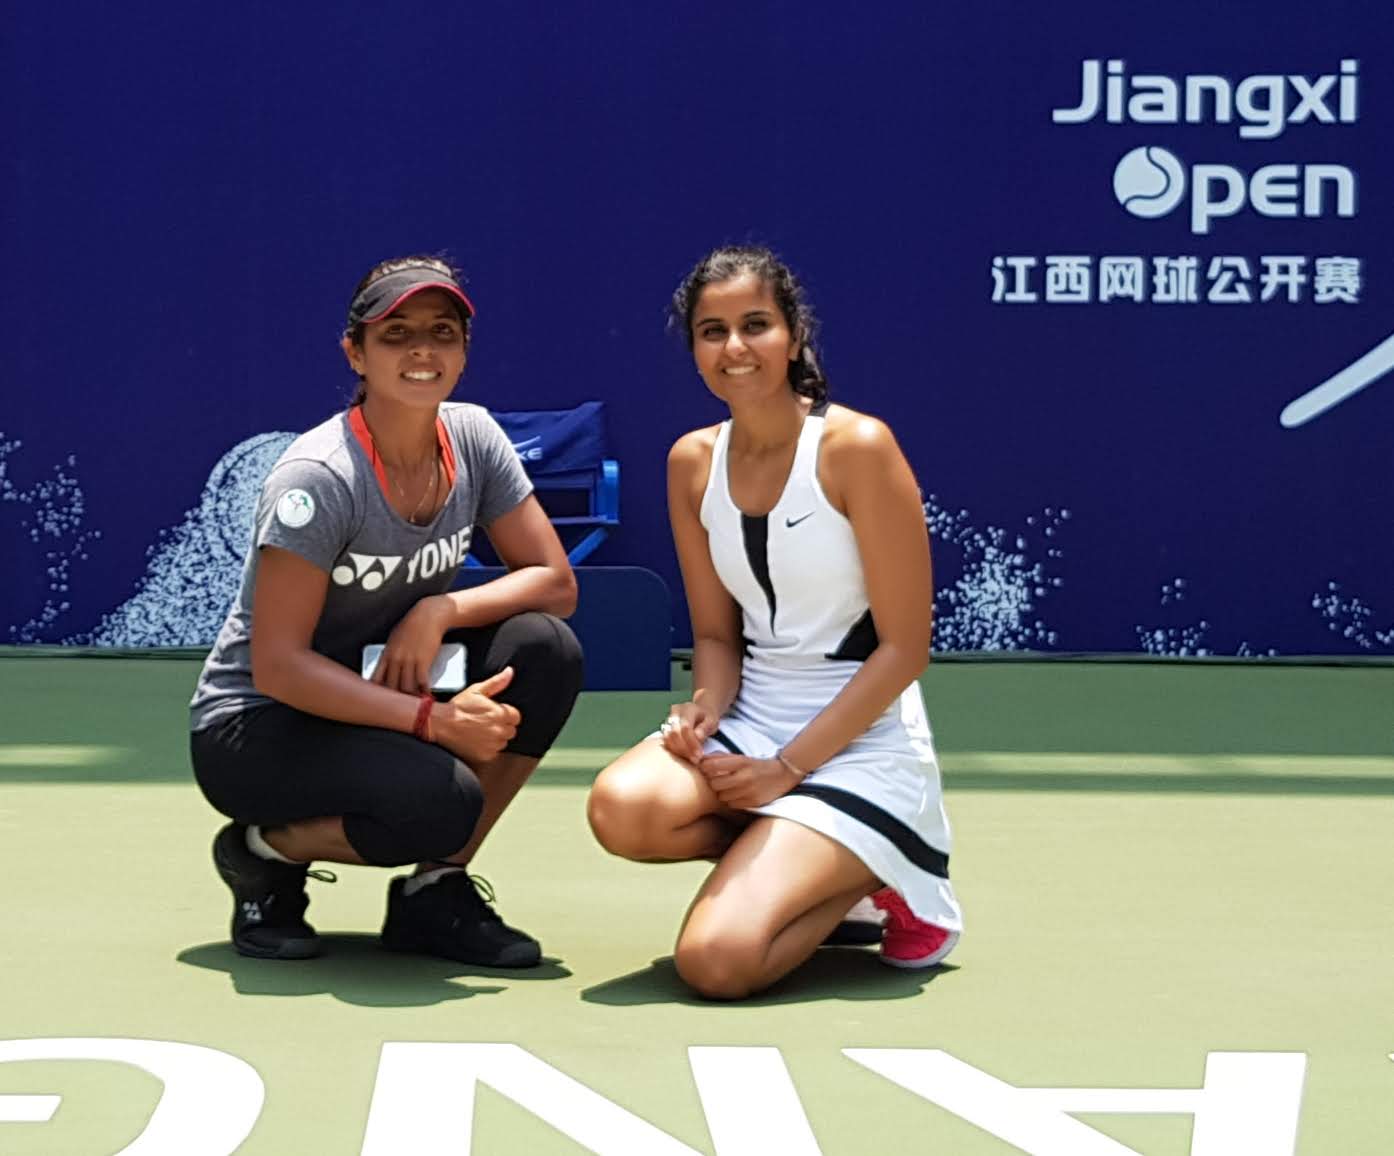 “She eats, drinks, sleeps, Tennis. Which is what makes her very special” says Krushmi Chhedha, friend and nutritionist of Indian no 1, Ankita Raina.